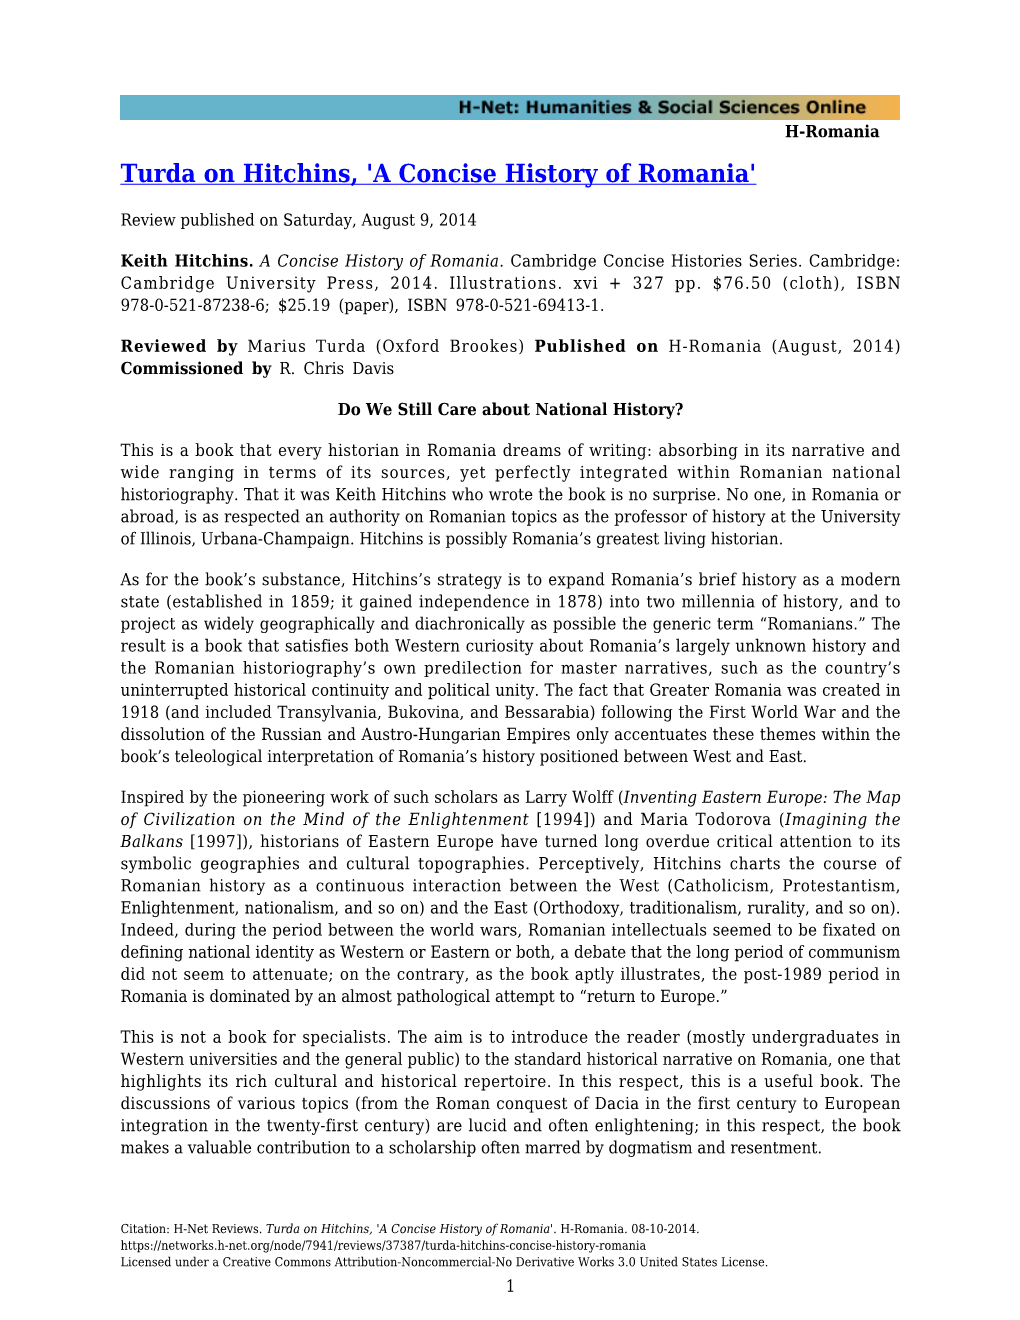 Turda on Hitchins, 'A Concise History of Romania'